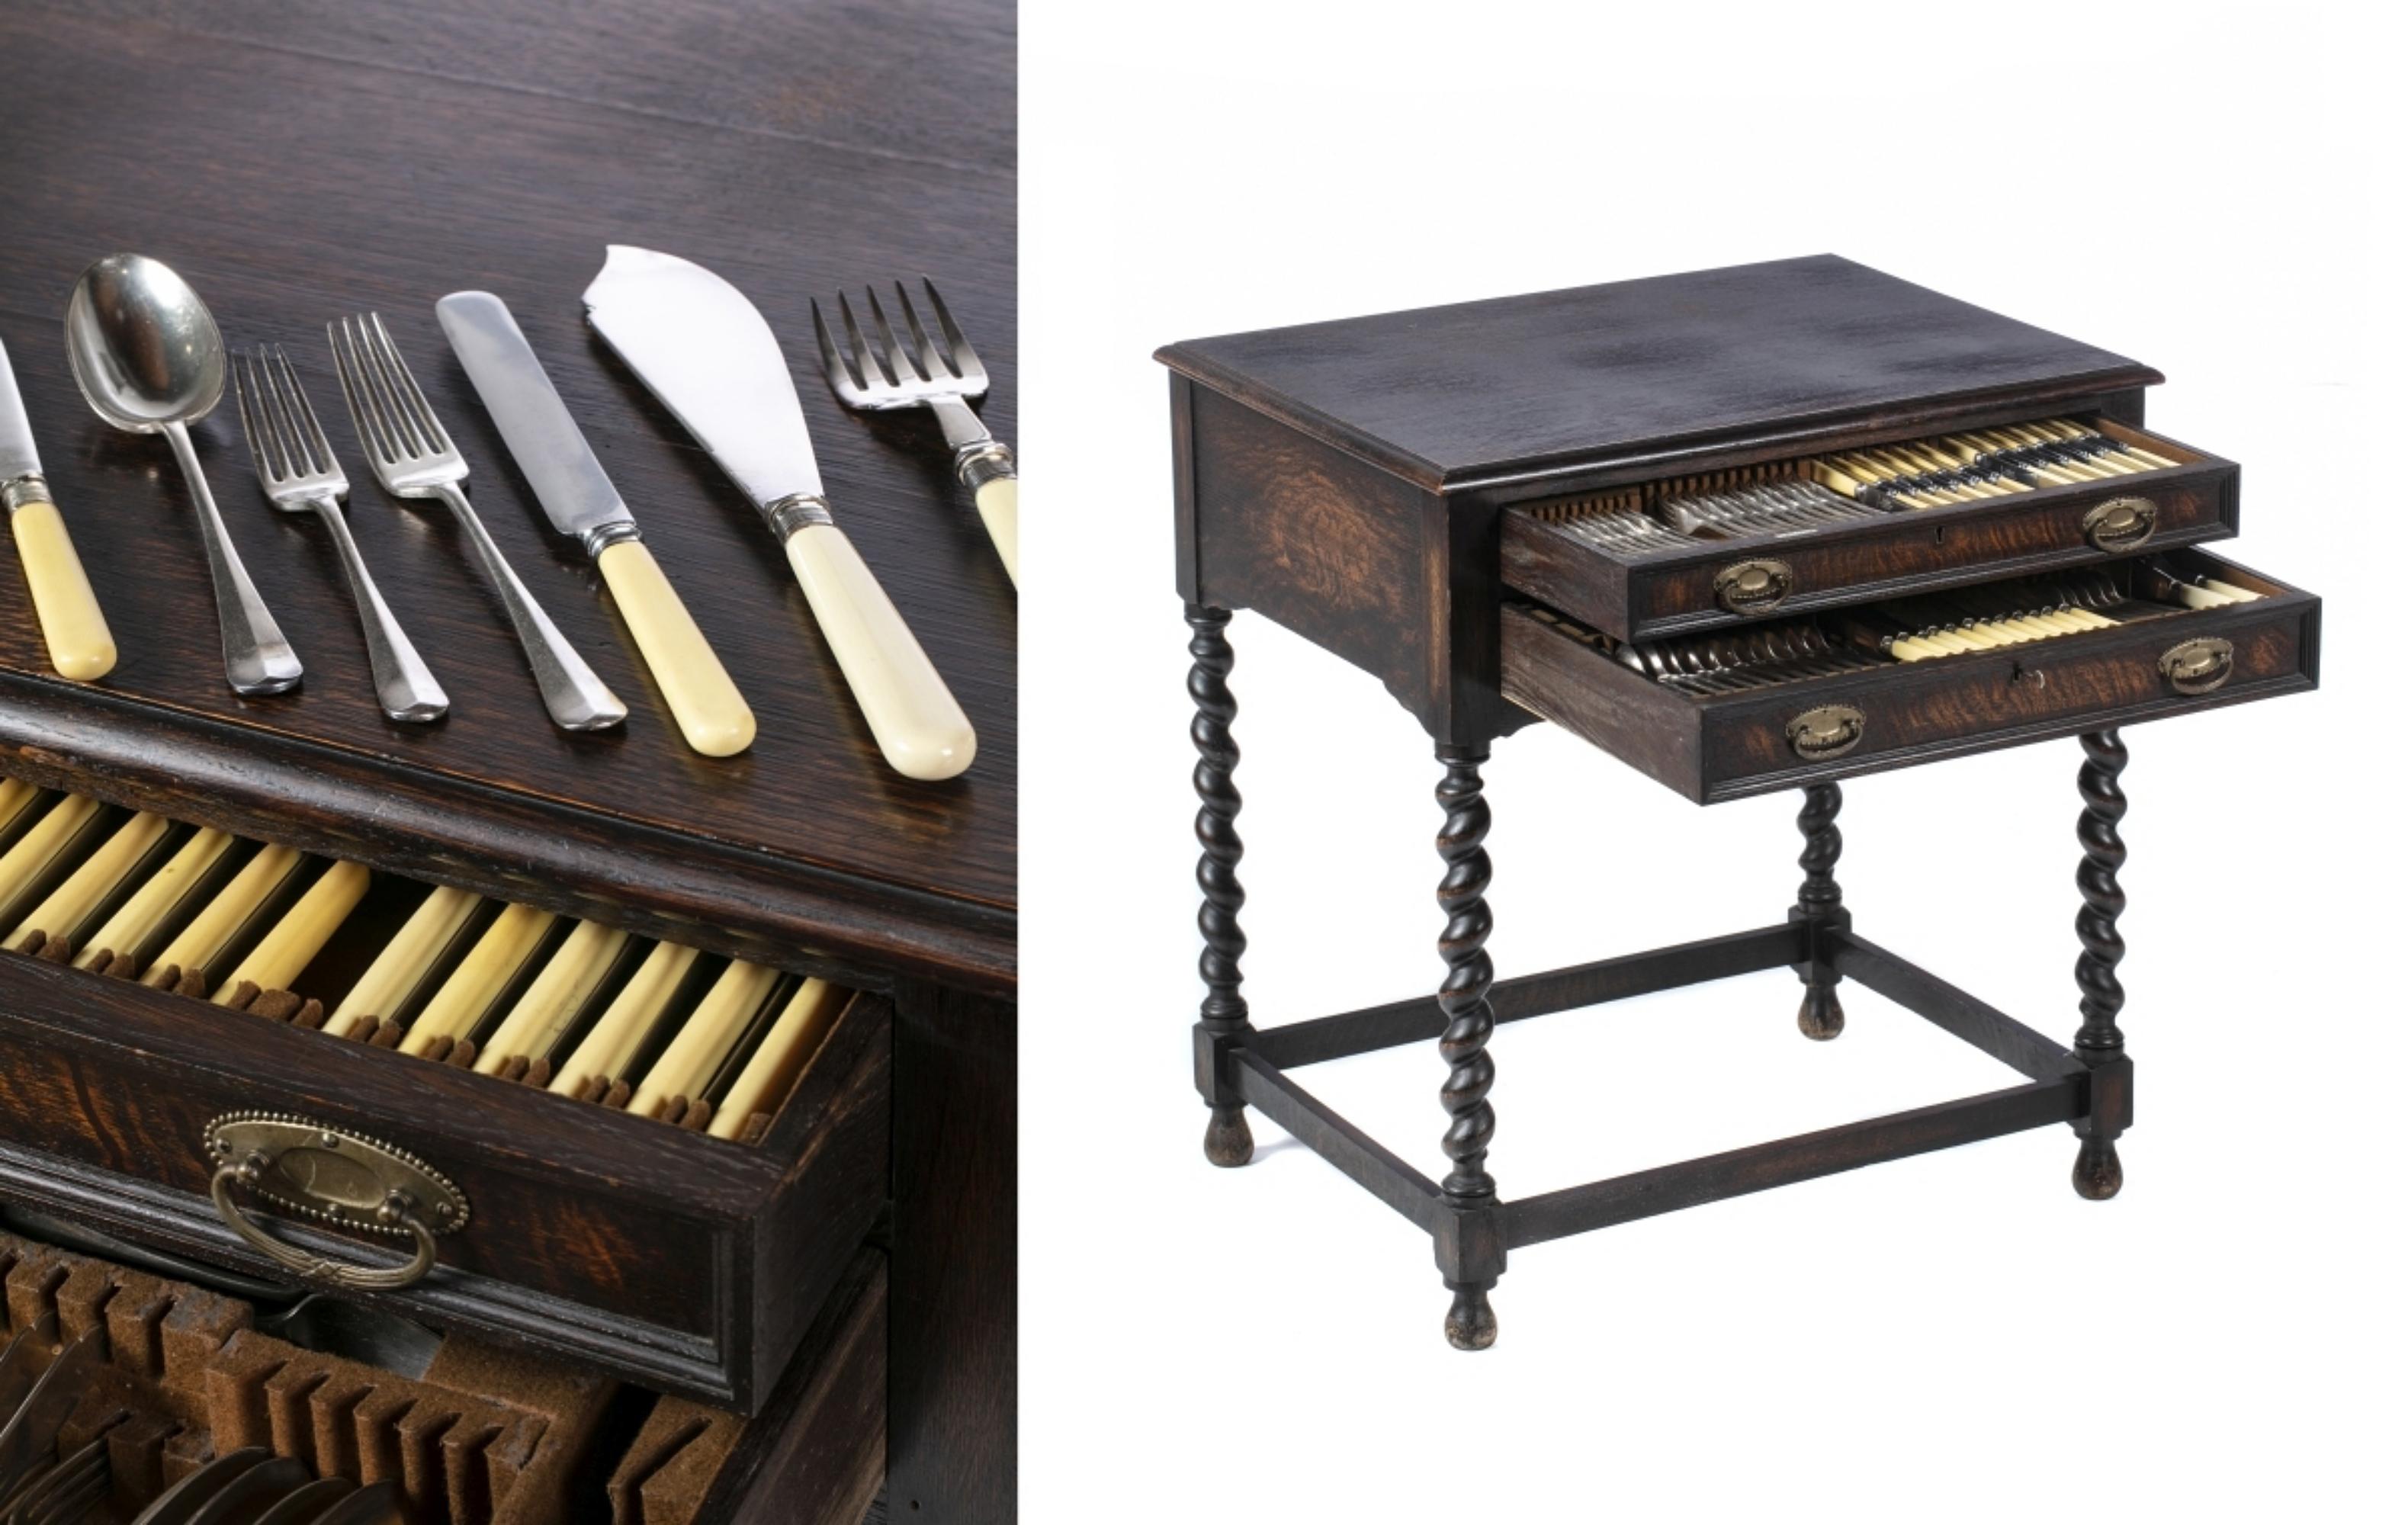 FAQ WITH ENGLISH FURNITURE

London, 19th Century
from 'Mappin & Webb Ltd.', 

Oak furniture with turned legs, with 2 drawers with cone cutlery for 12 people, comprising: (1st drawer) 12 teaspoons; 12 meat knives; 12 cheese knives; 11 table forks; 12